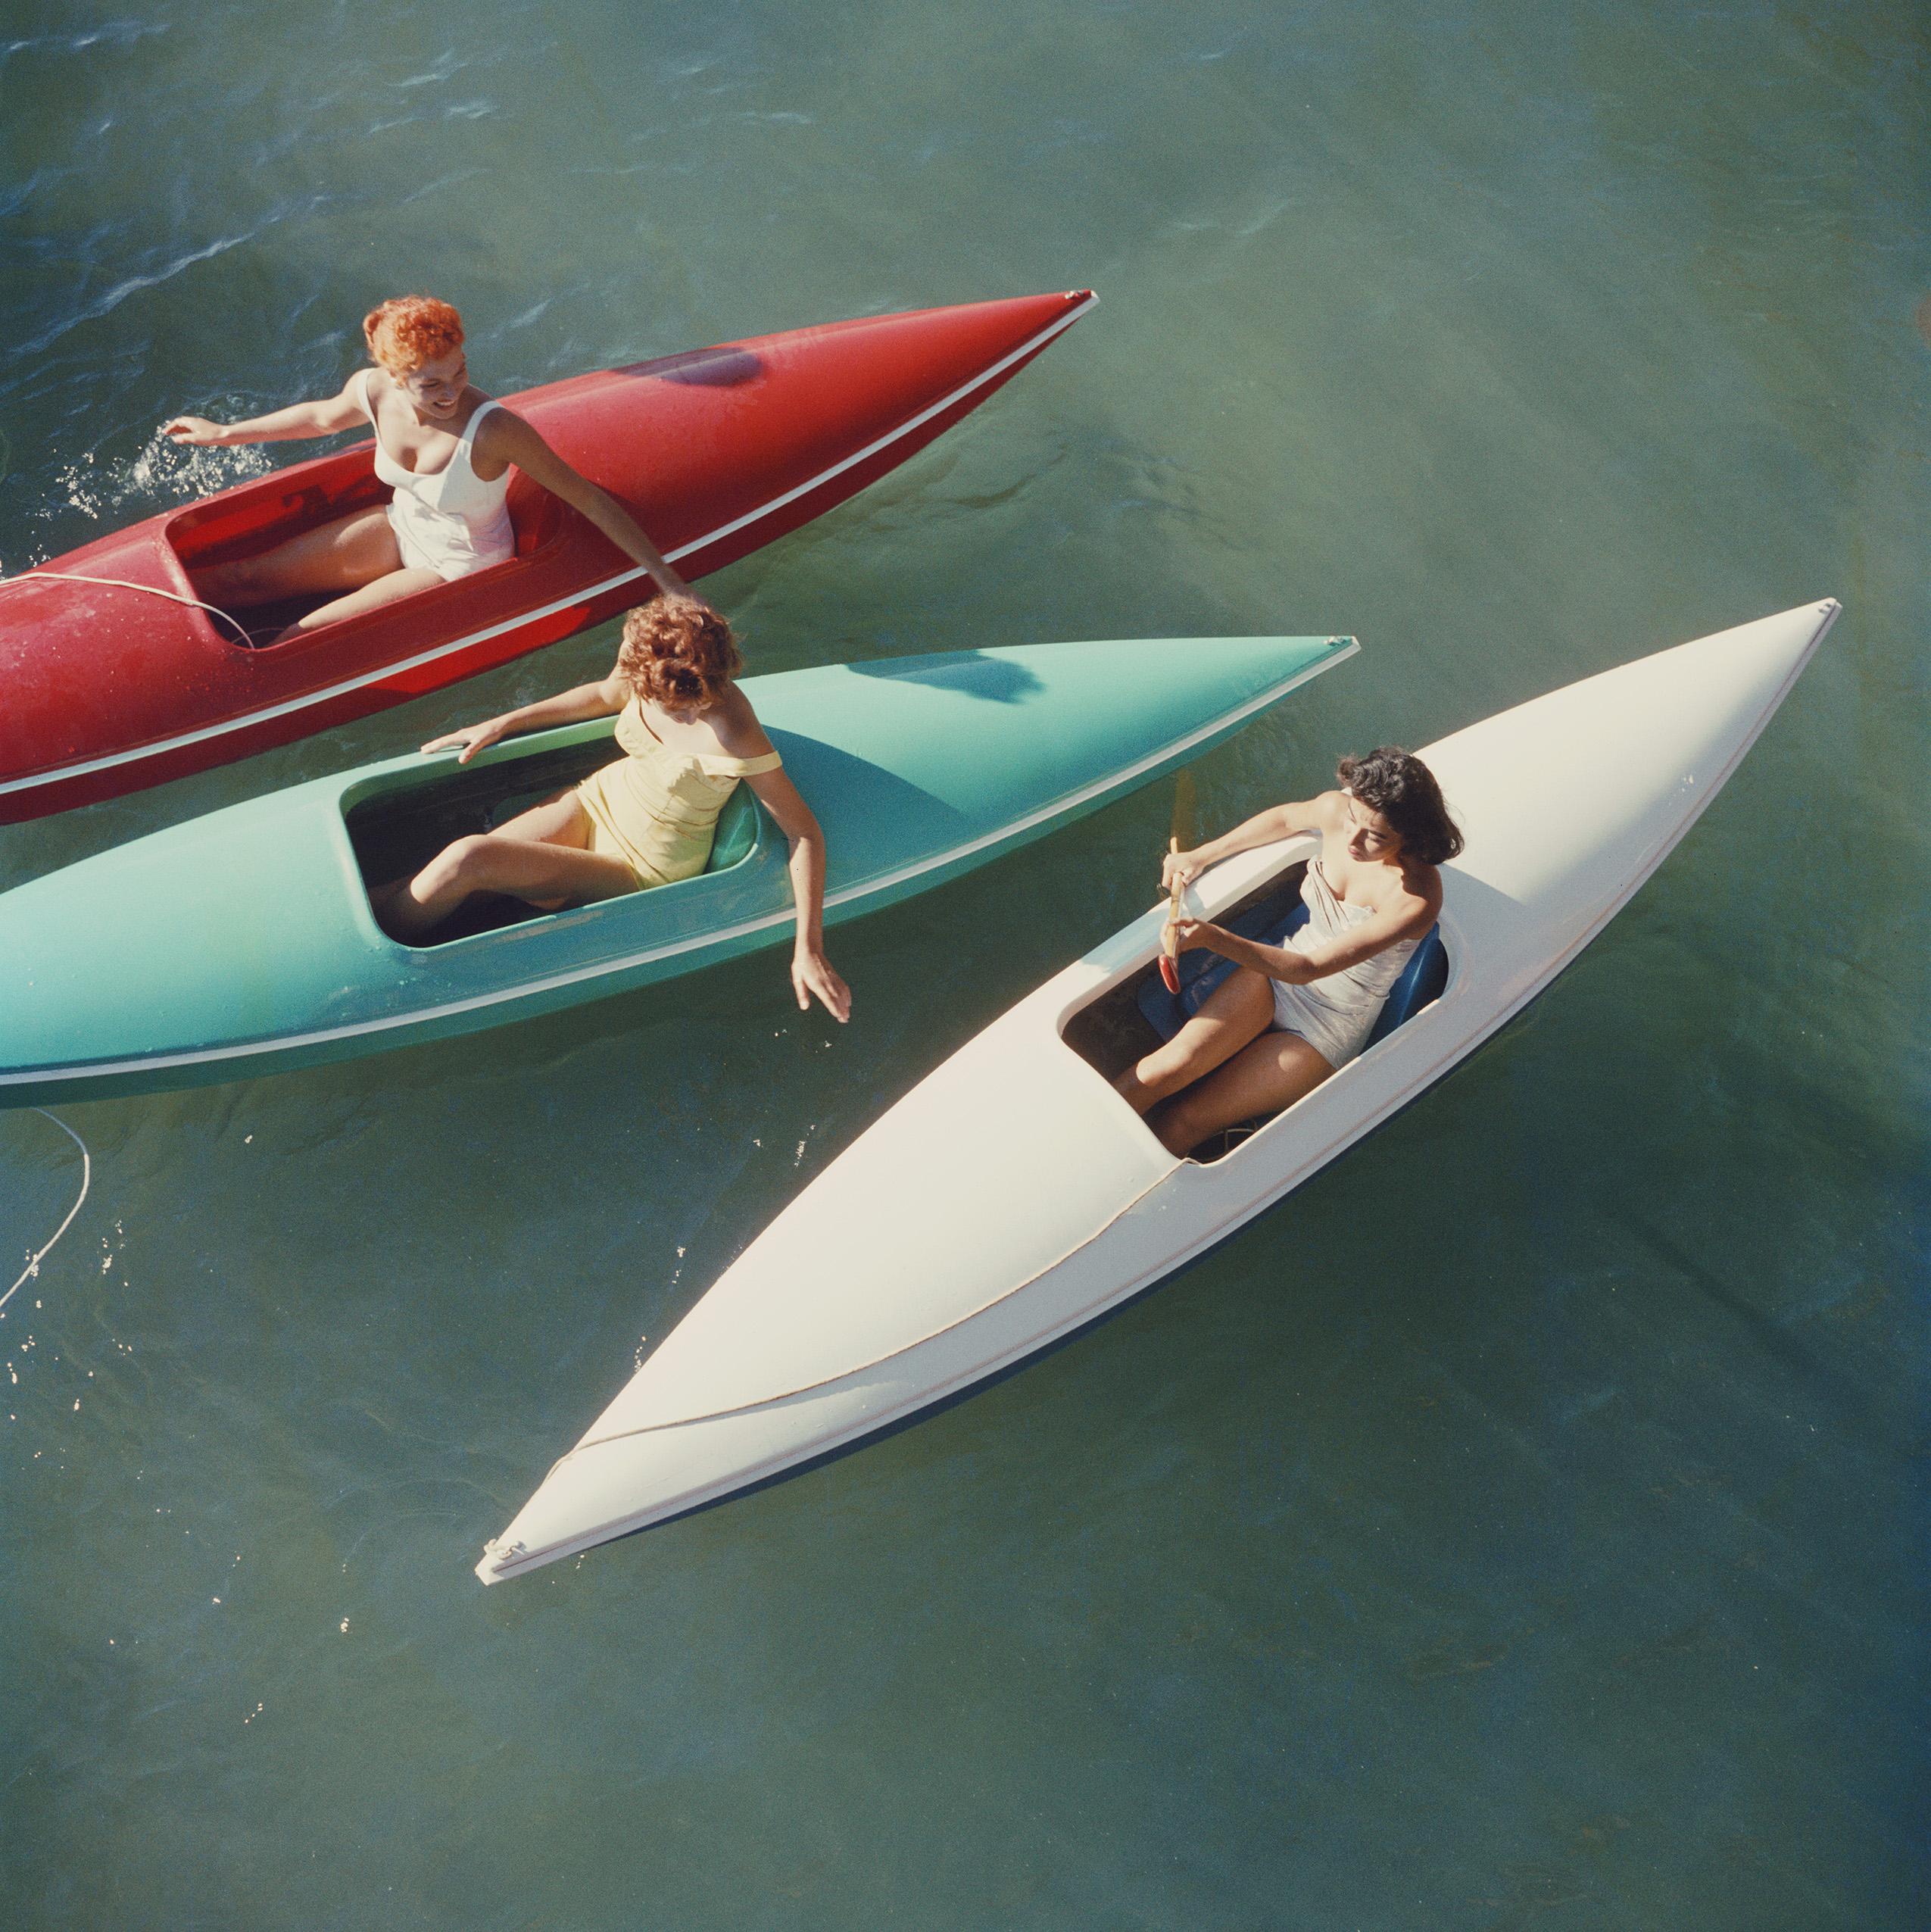 Slim Aarons Landscape Photograph - Lake Tahoe Trip, Estate Edition Photograph, Red, Green, White Canoes Zephyr Cove